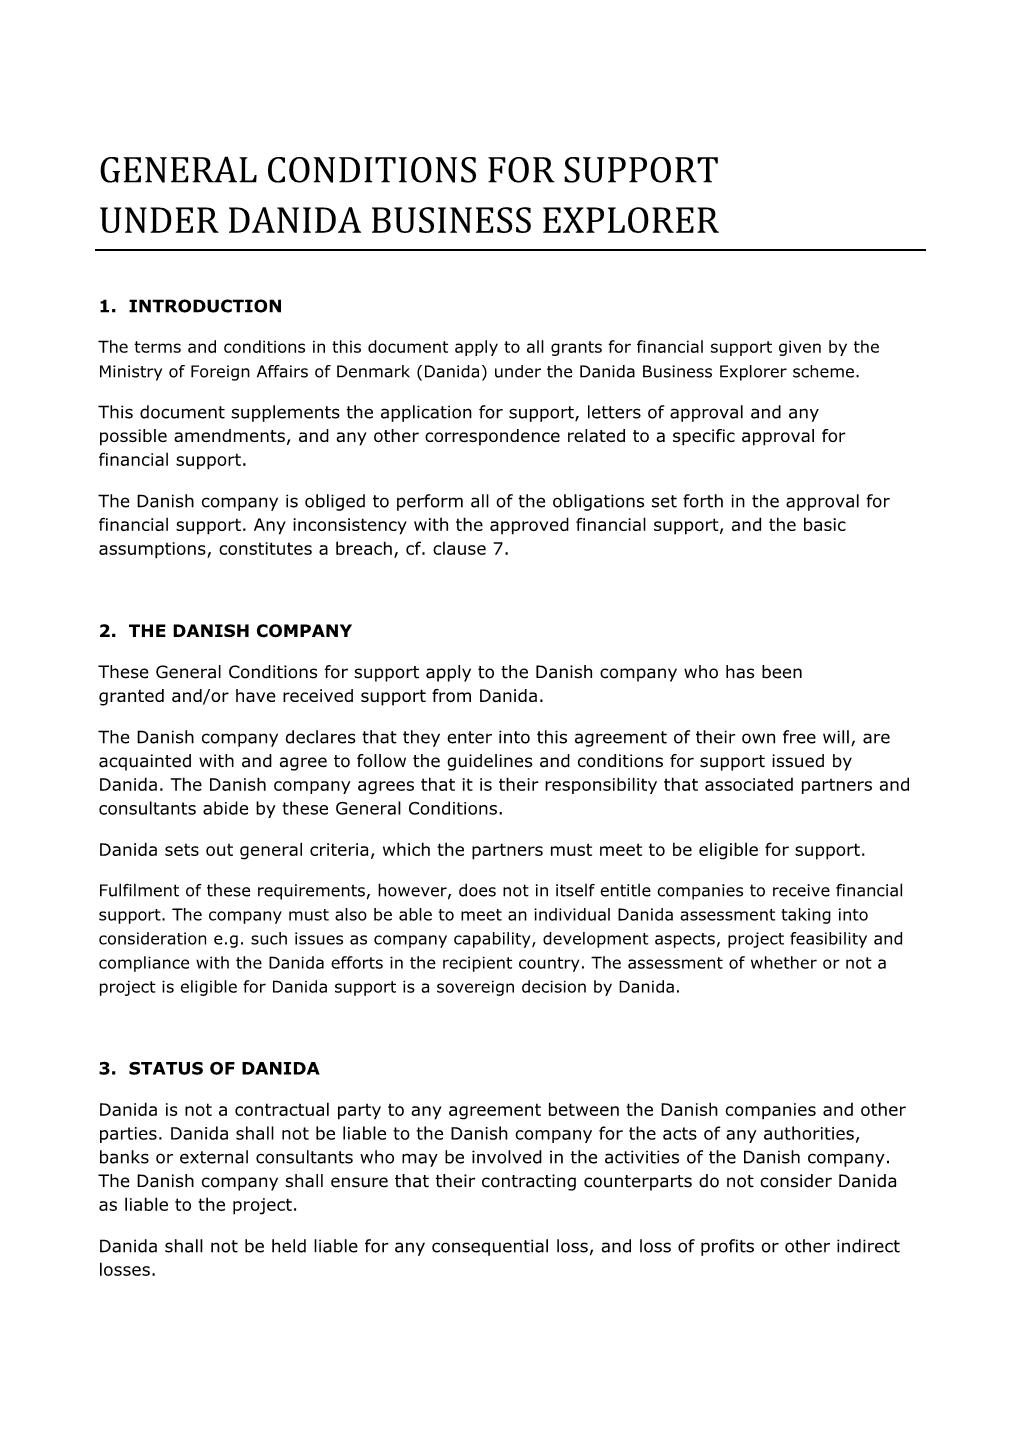 General Conditions for Support Under Danida Business Explorer